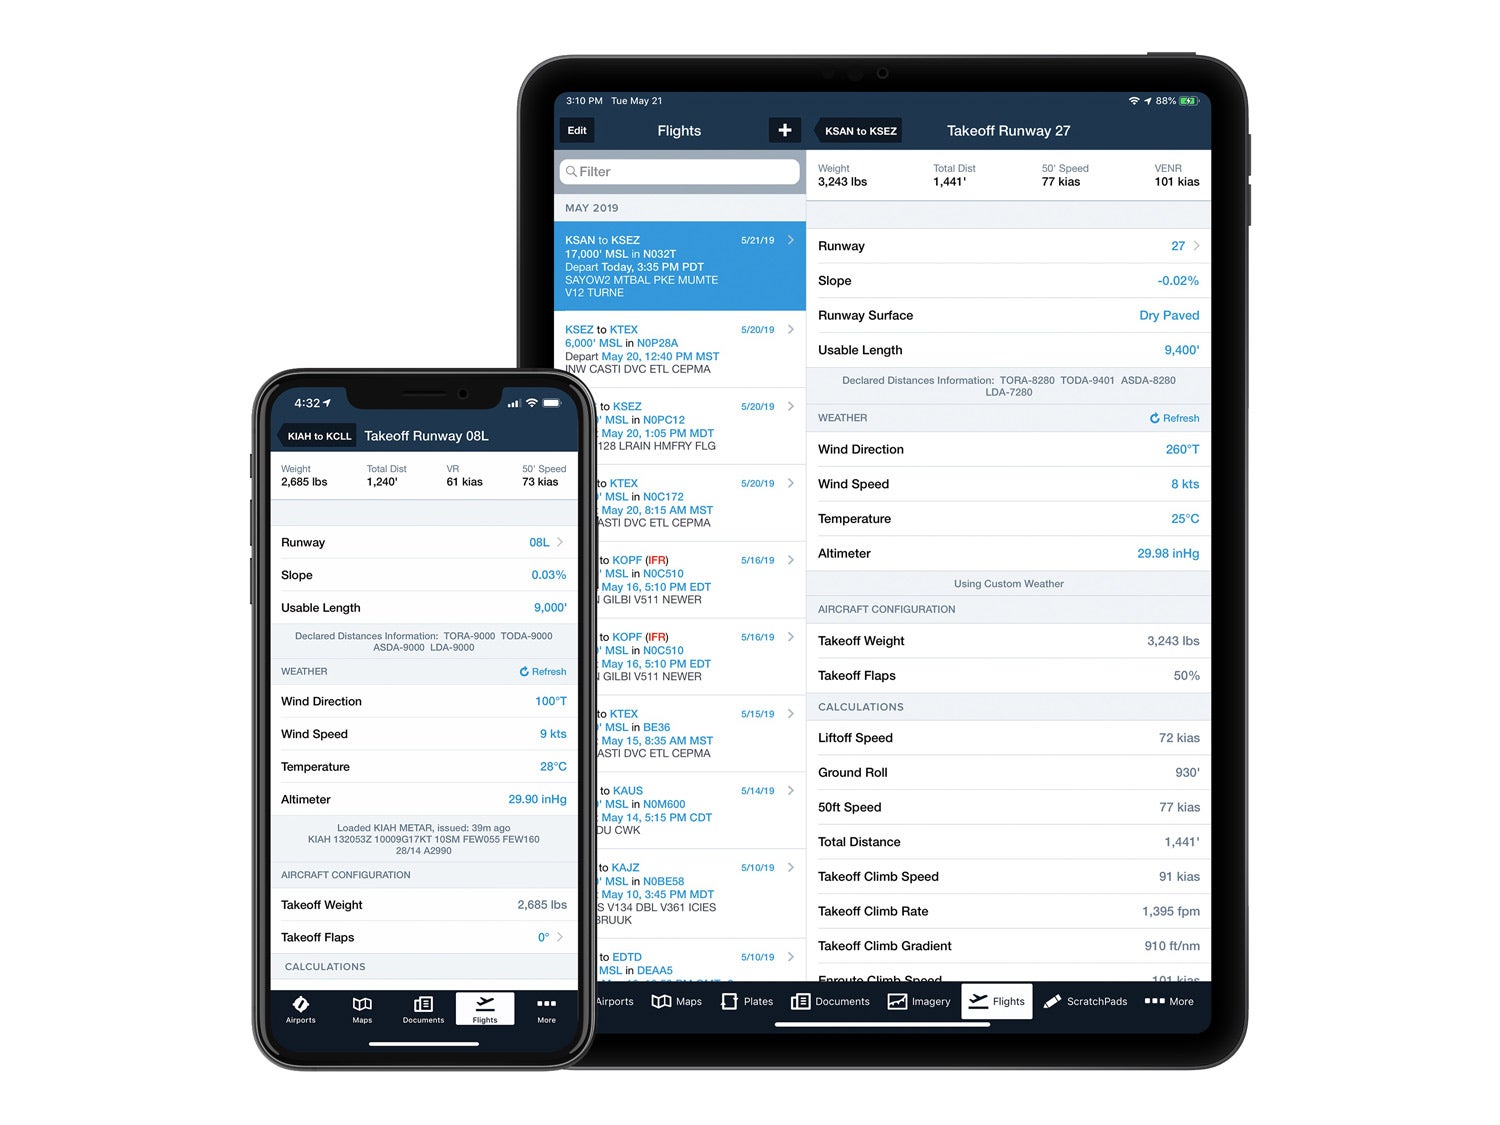 Latest ForeFlight Release Adds Takeoff and Landing Performance Tools